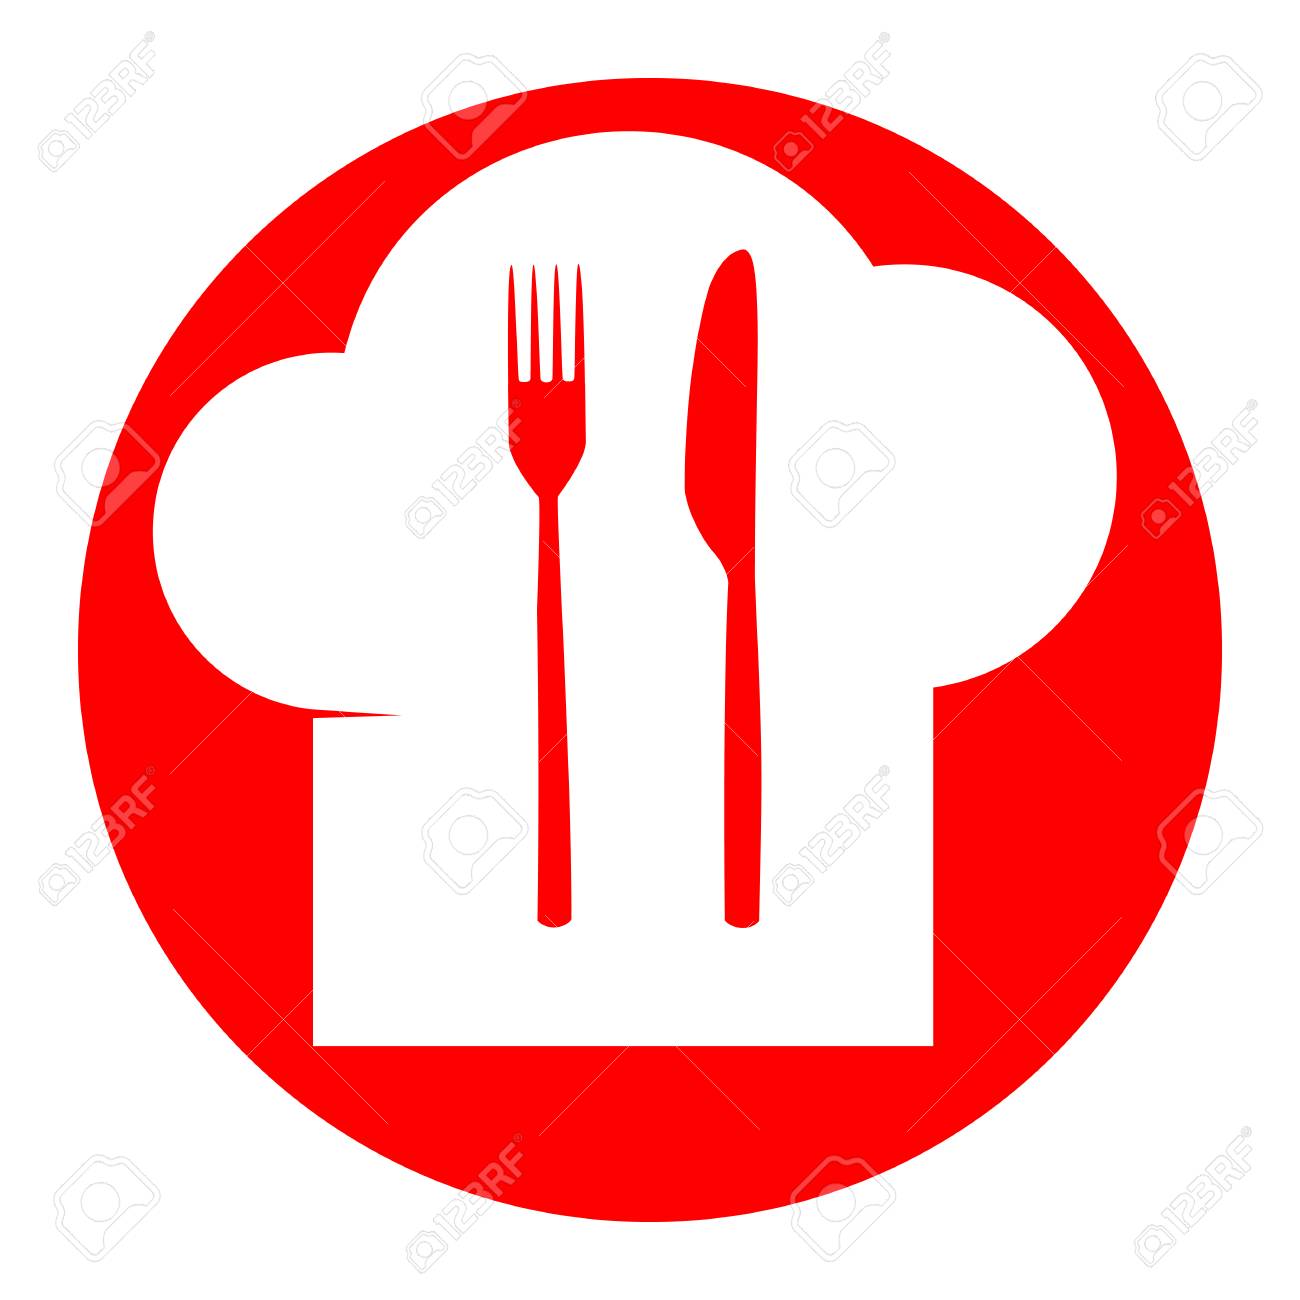 fork clipart red